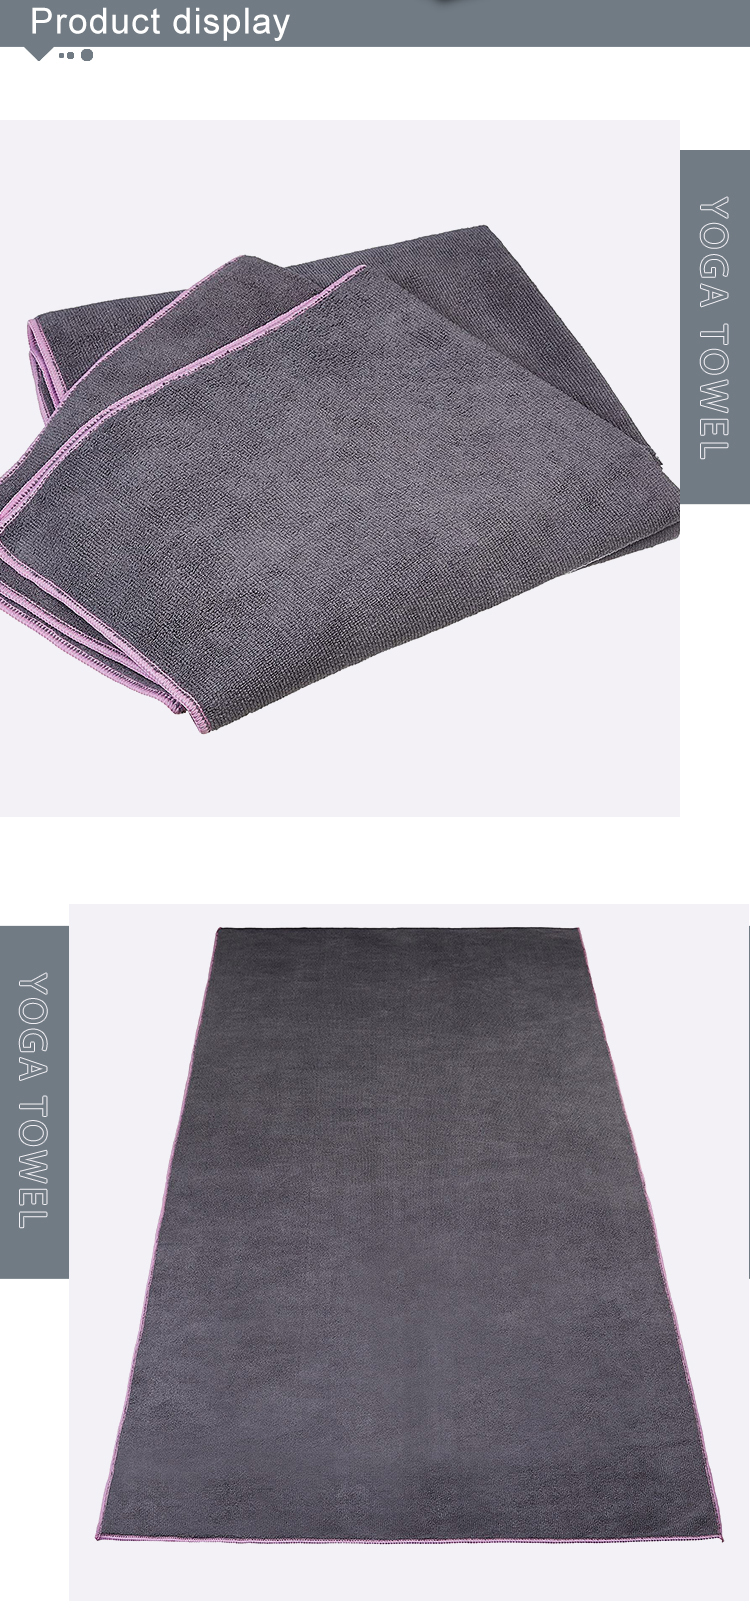 China low price products high quality fashion microfibe non slipr towel used for Hot yoga movement